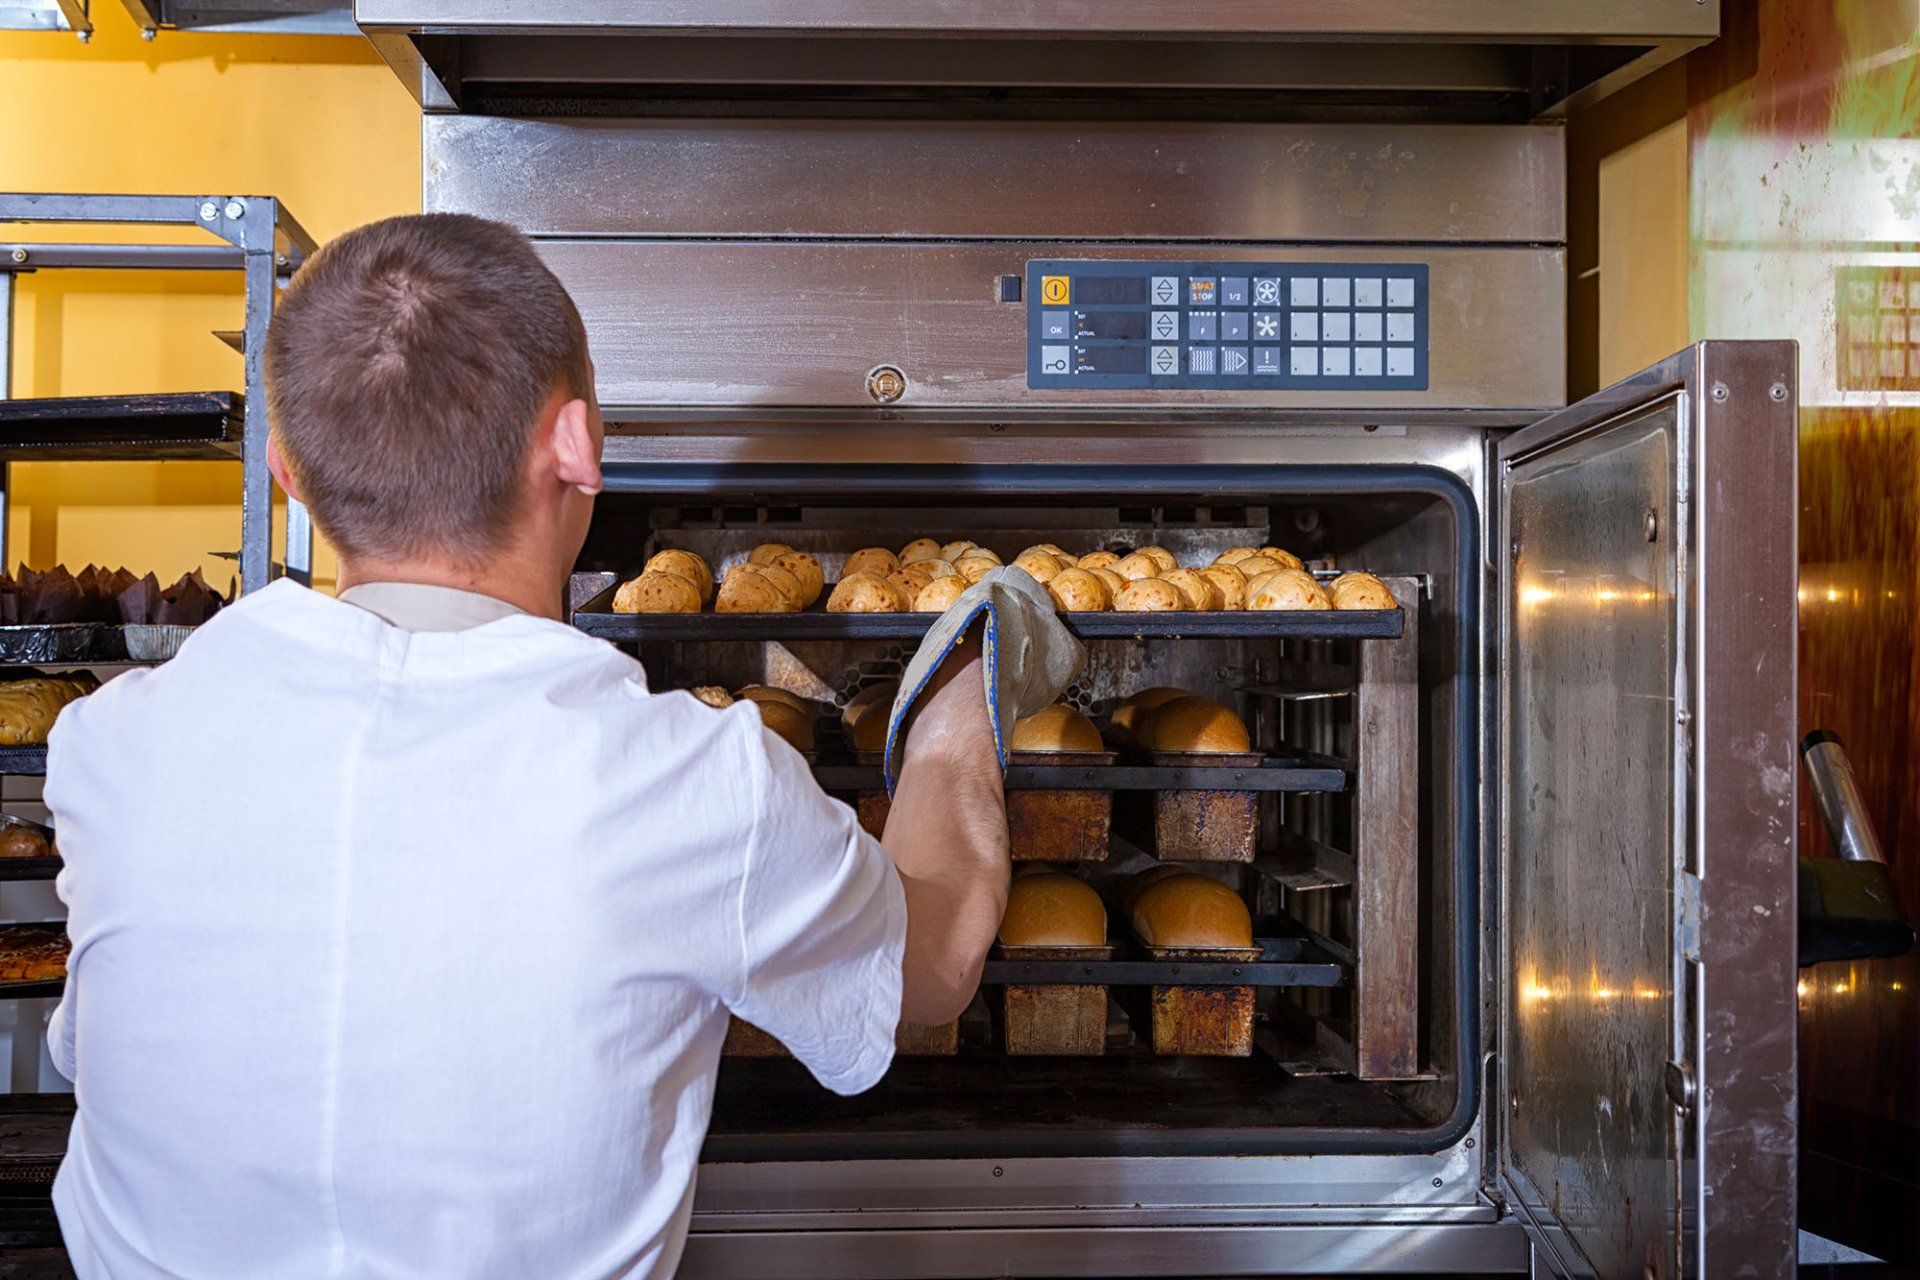 A man removing baked goods from a commercial oven.